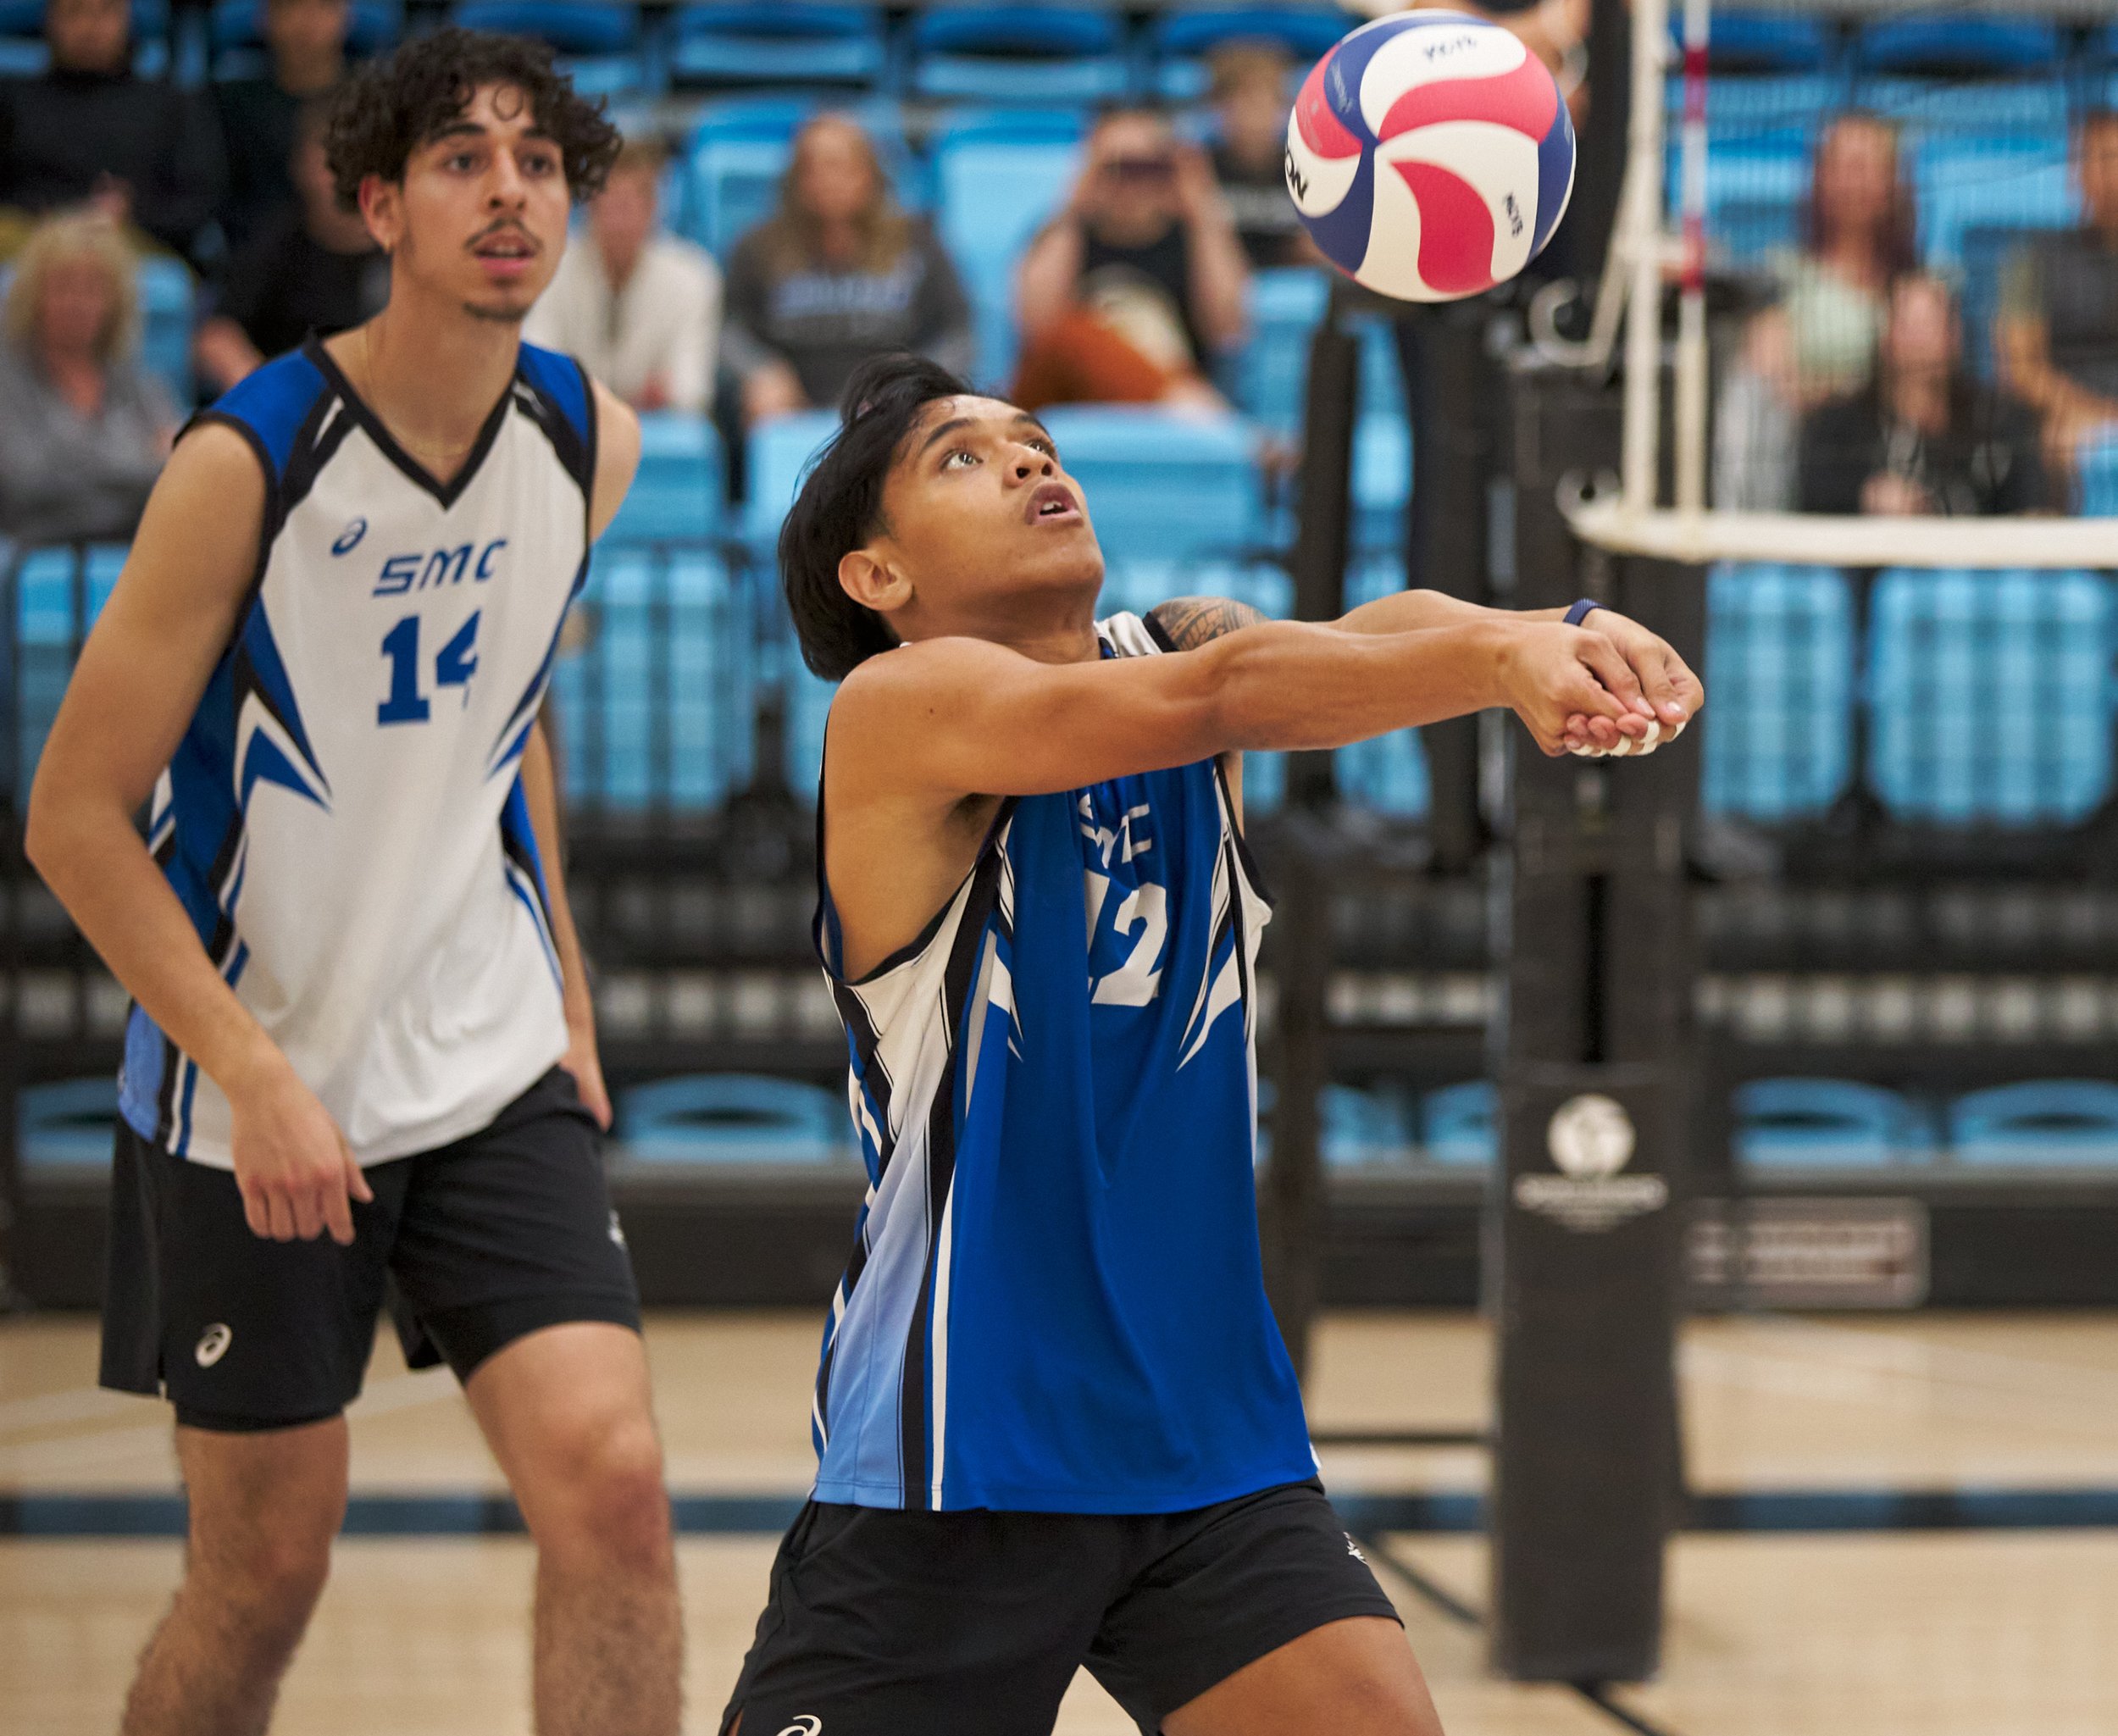  Santa Monica College Corsairs' Luis Garzon watches Tylus Williams bump the ball during the men's volleyball match against the Moorpark College Raiders on Friday, March 17, 2023, at Moorpark College's Gymnasium in Moorpark, Calif. The Corsairs lost 3